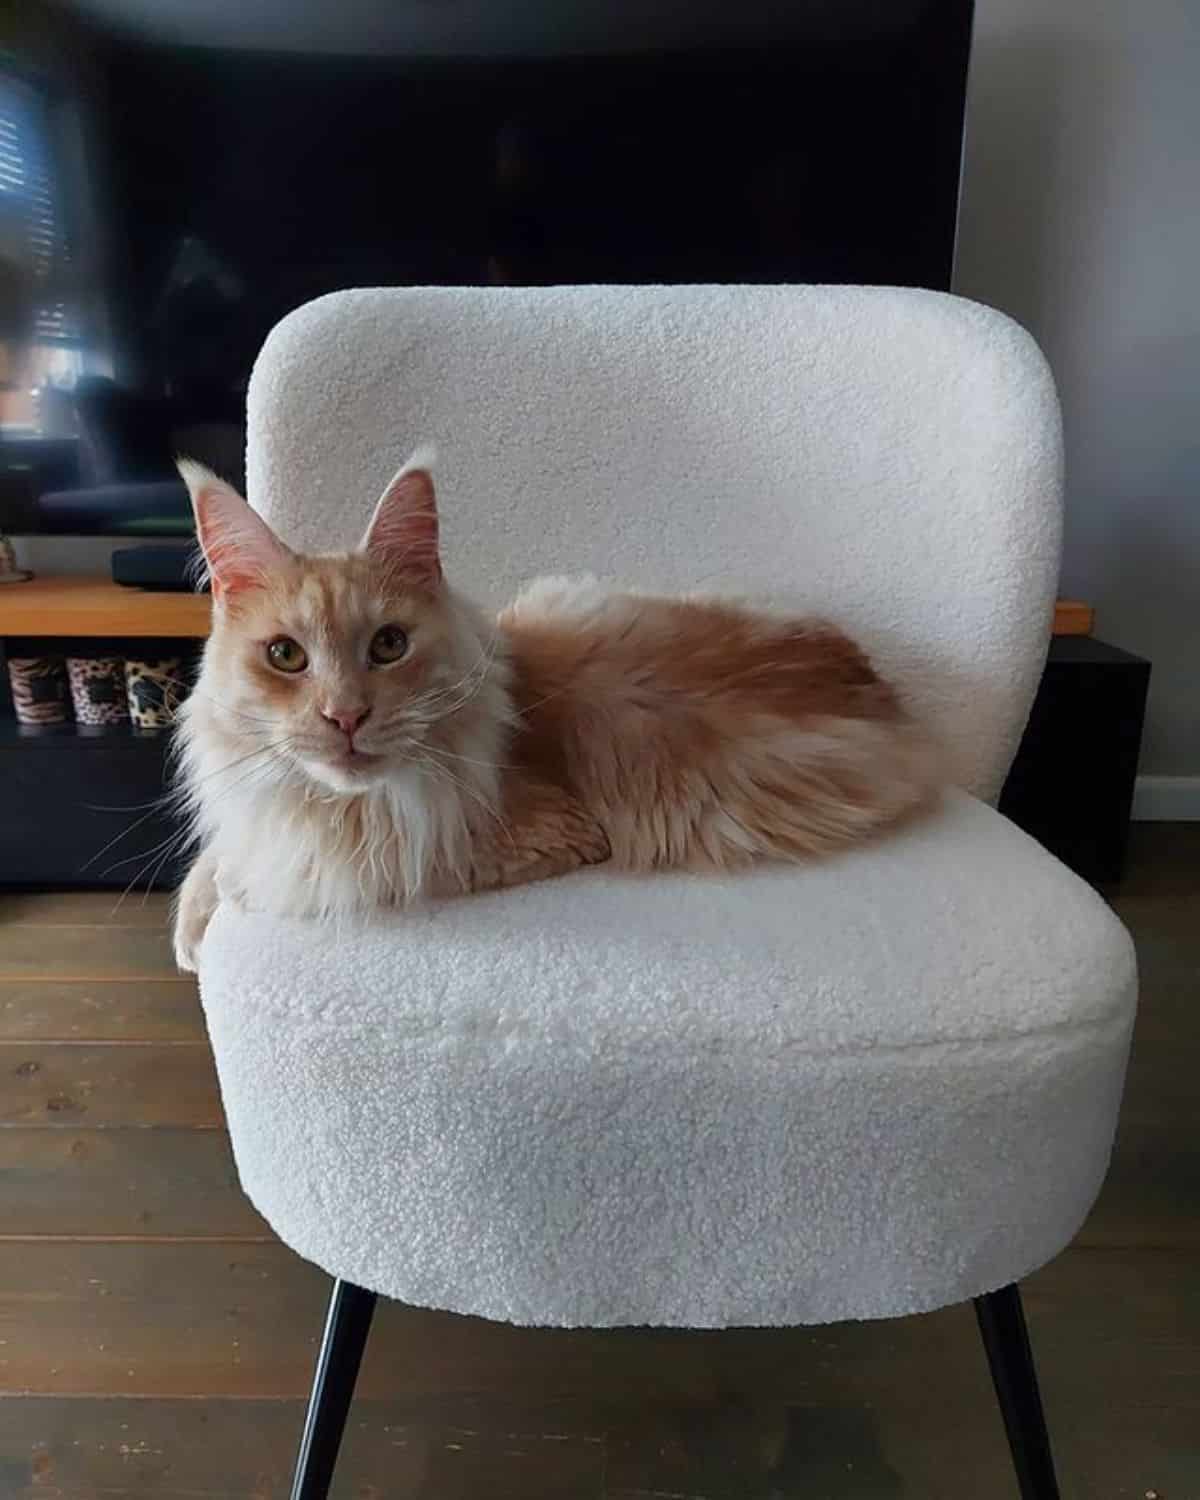 A fluffy golden maine coon lying on a white chair.